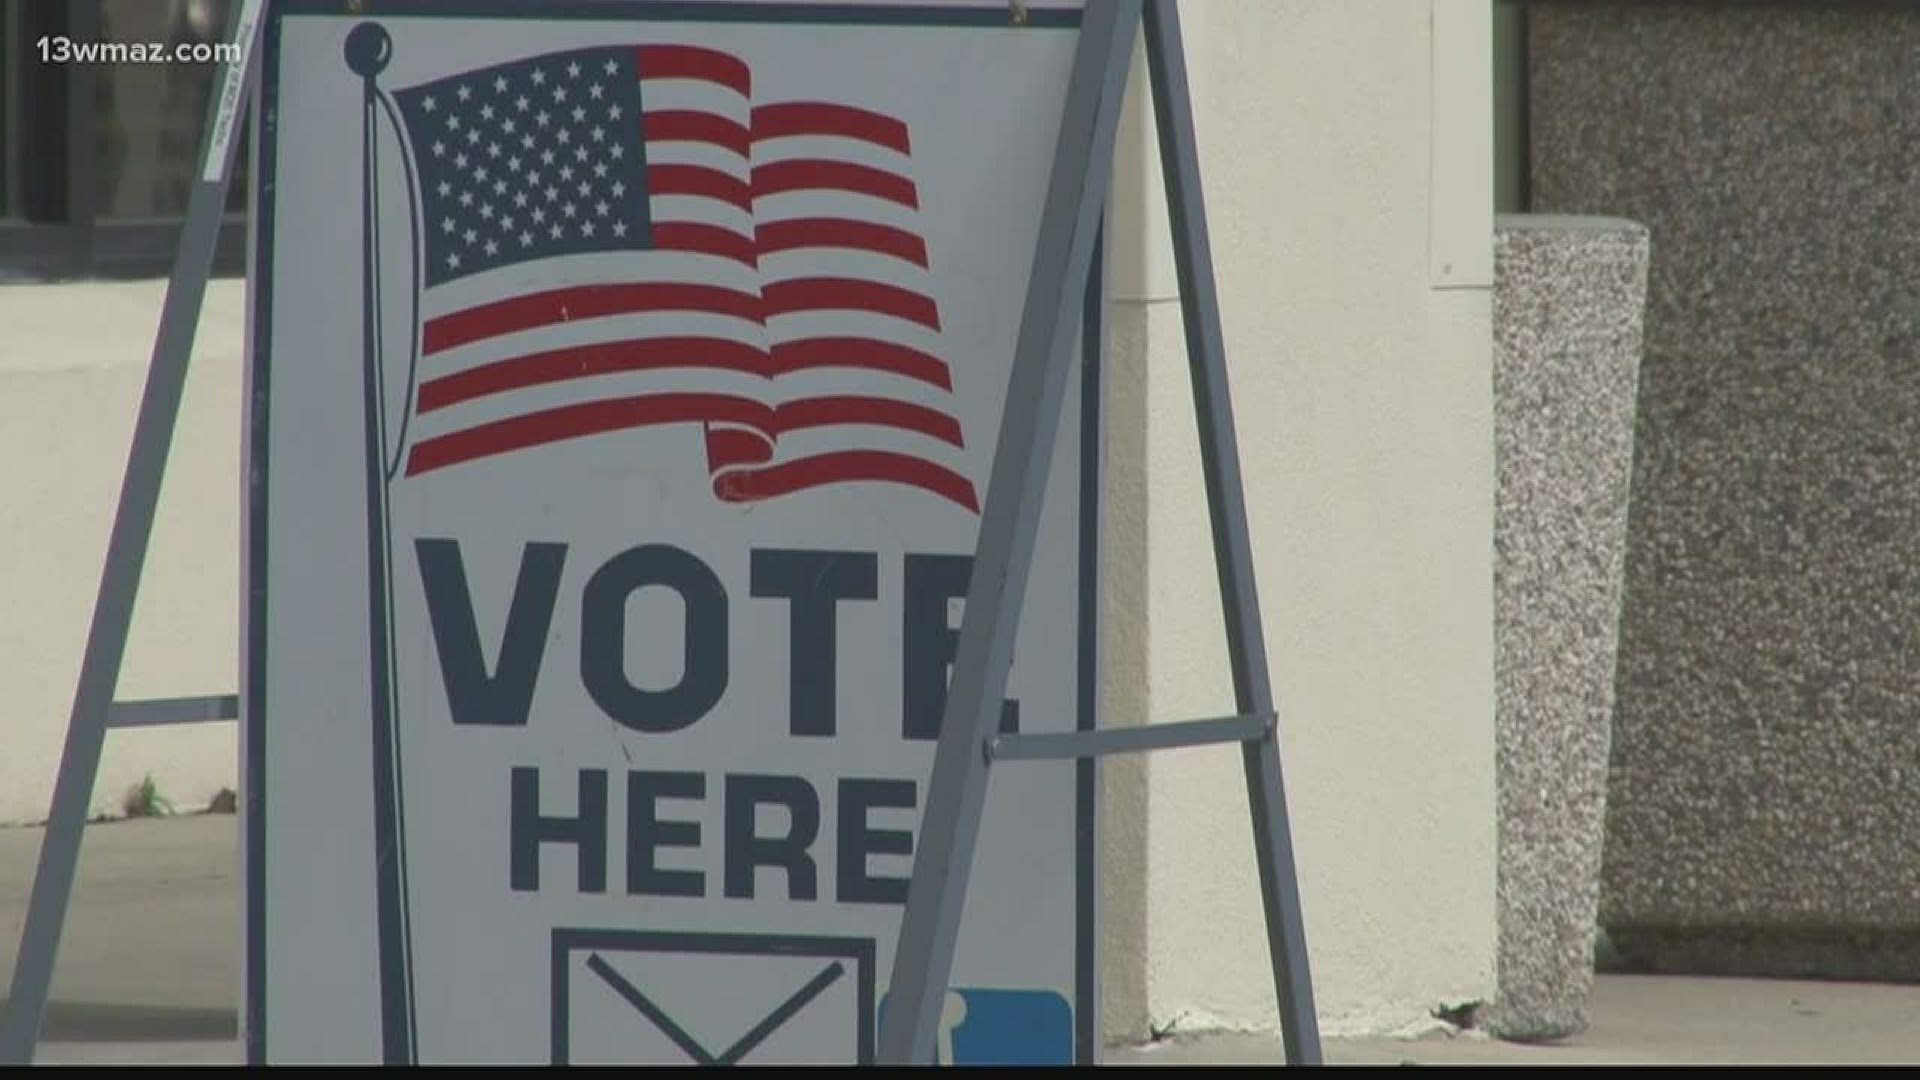 With early voting underway this week, the Macon-Bibb Board of Elections is making sure those who decide to vote in person are kept safe.